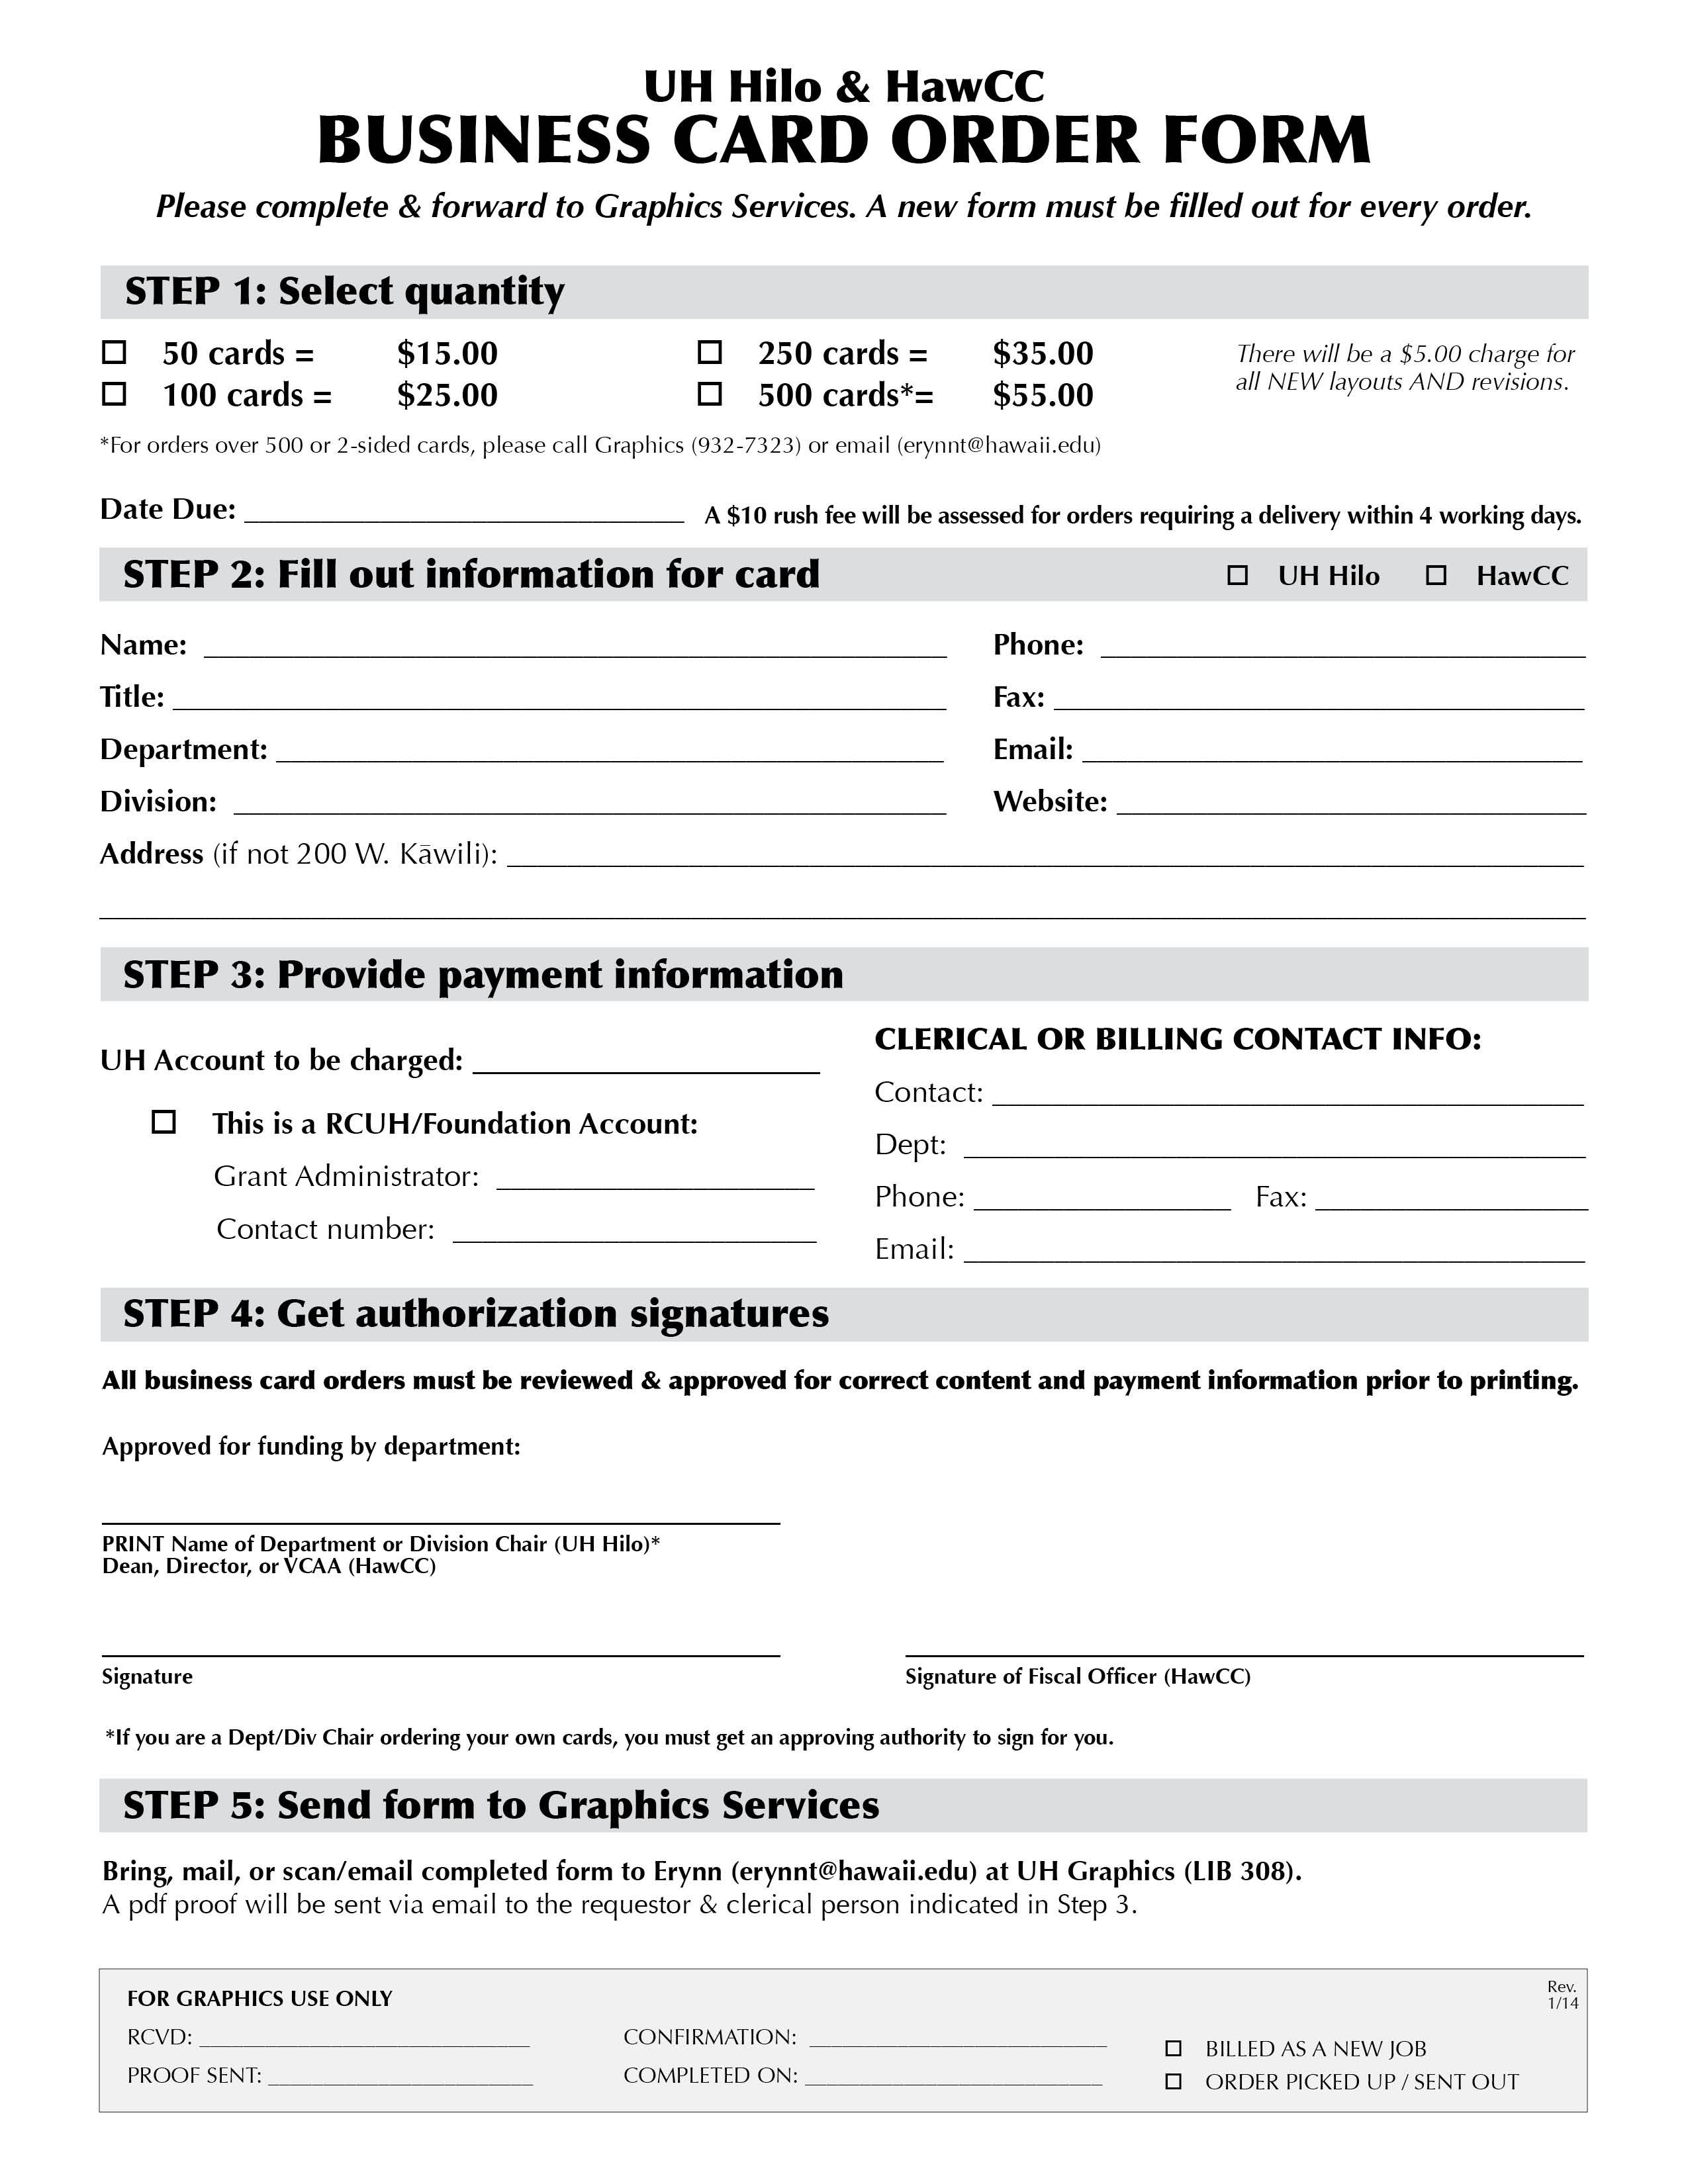 order form with credit card template   Boat.jeremyeaton.co